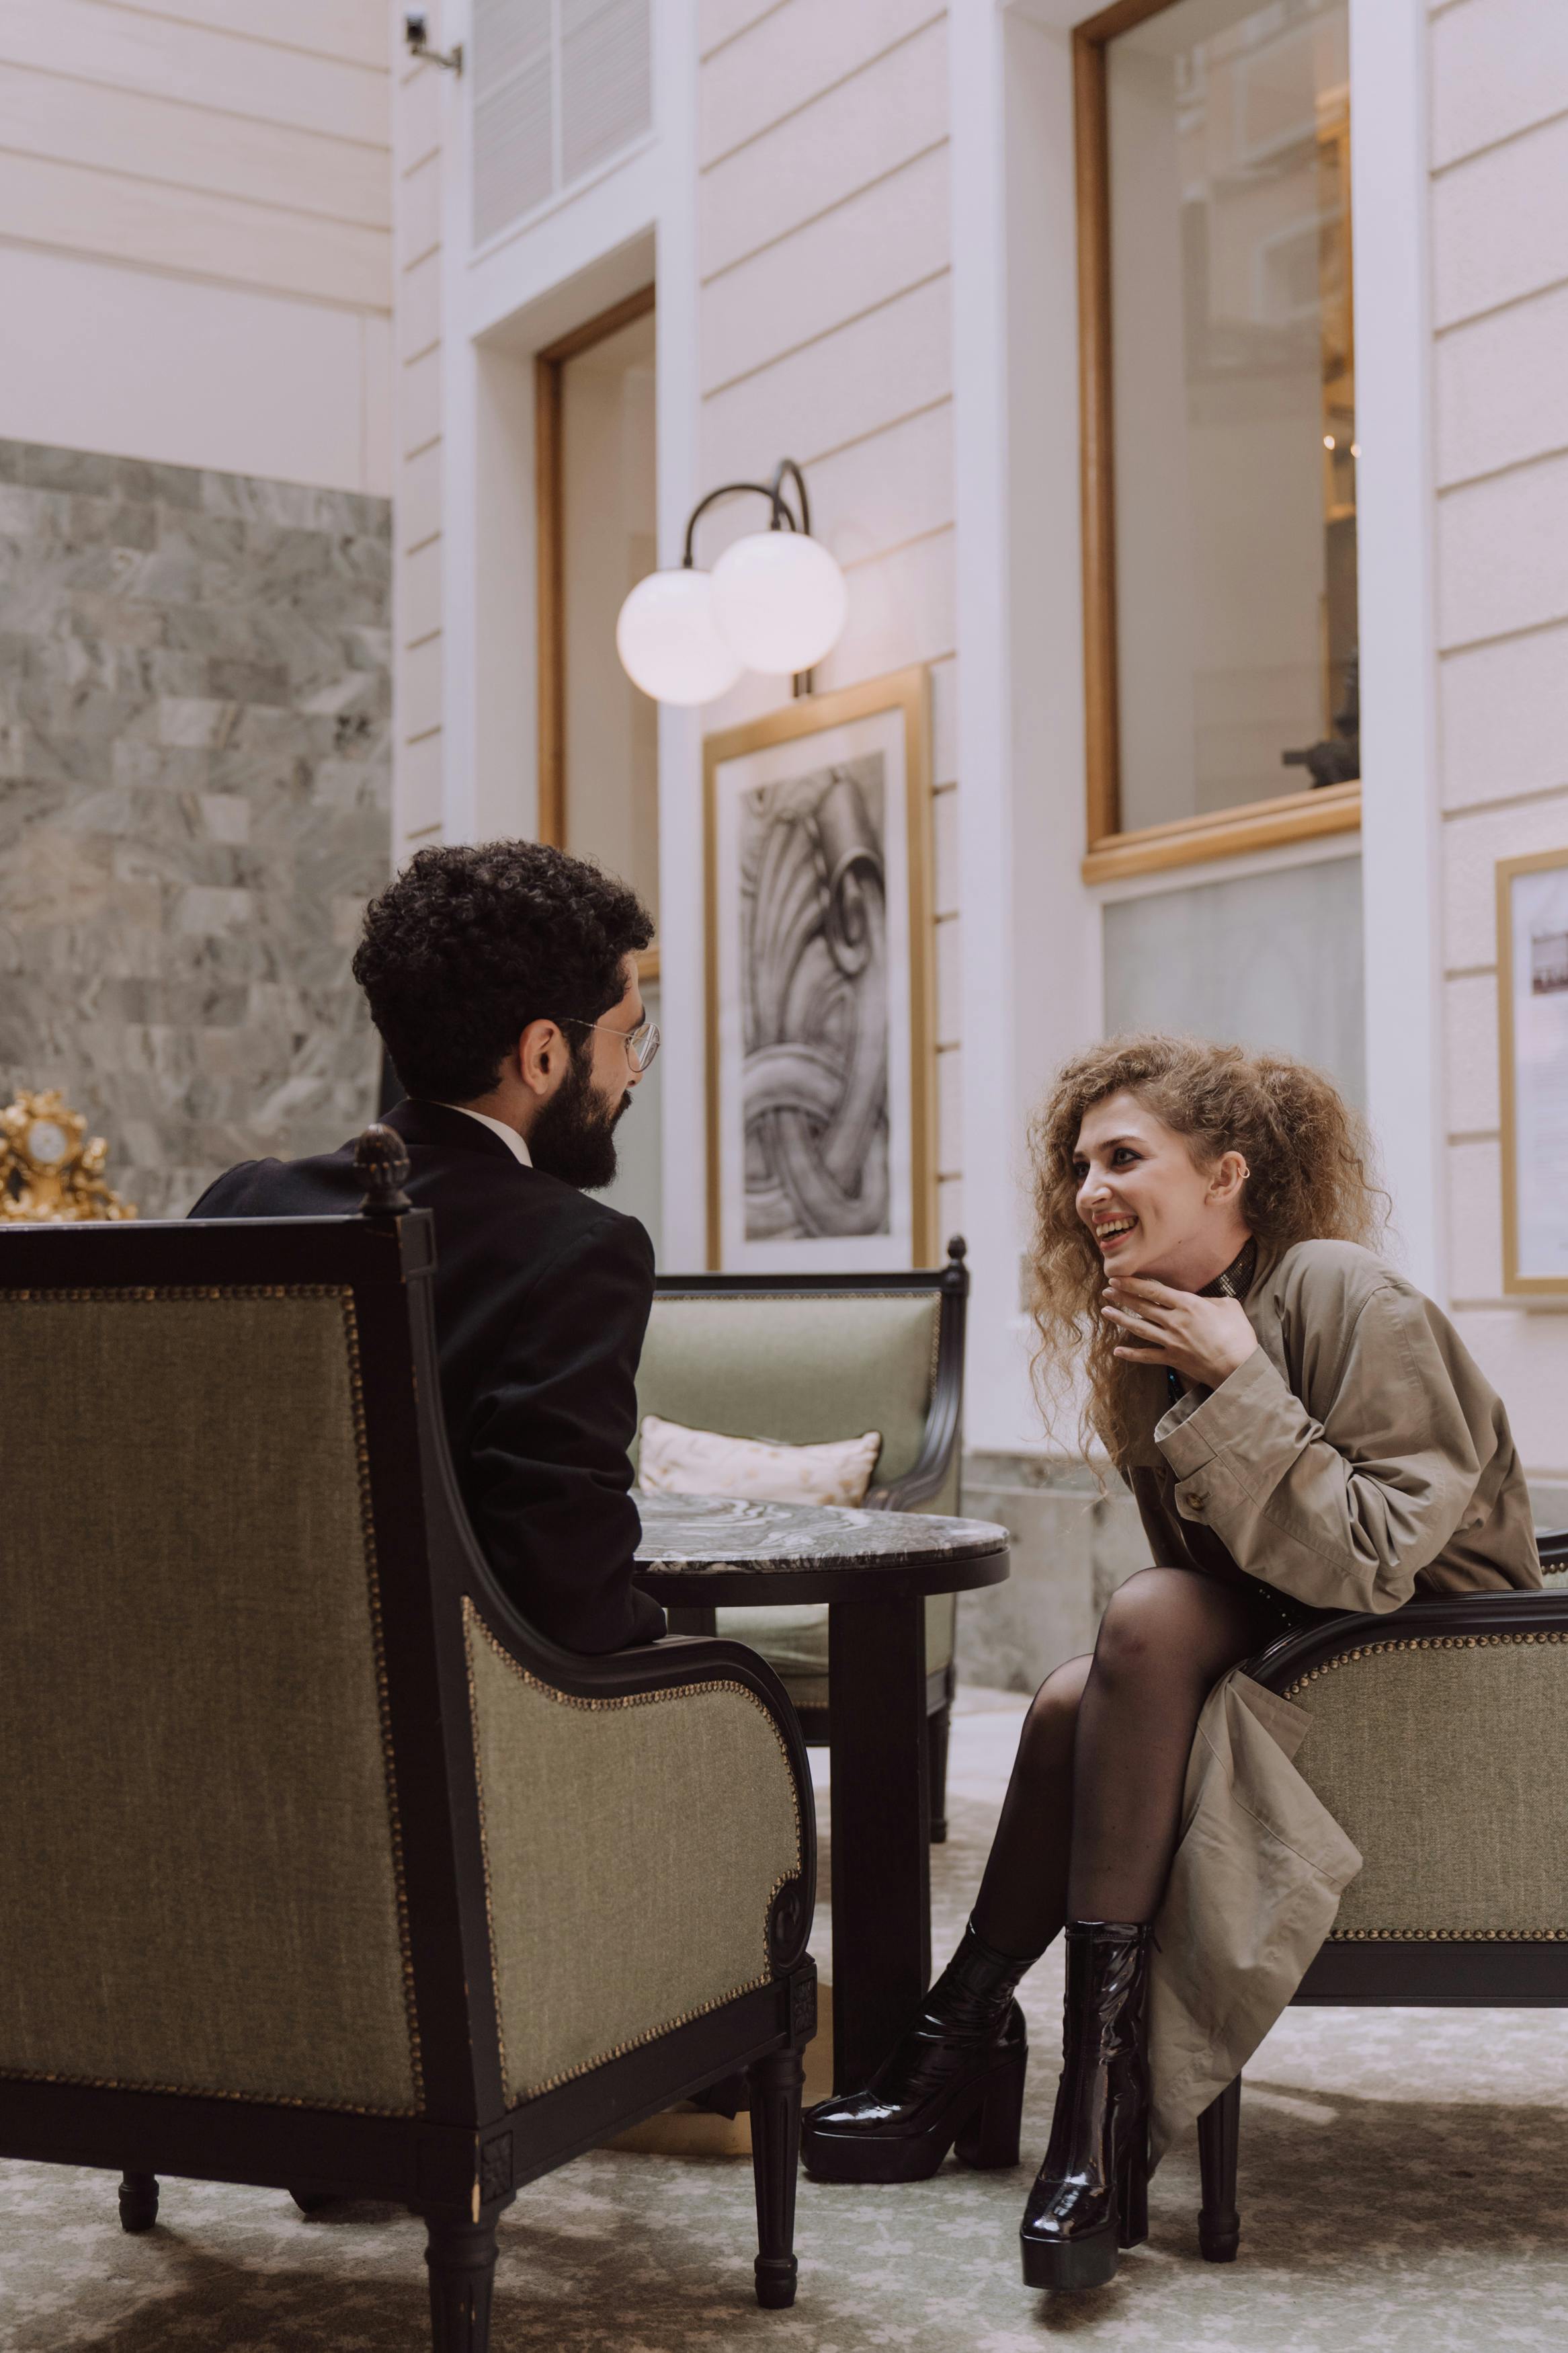 A woman laughing while talking to a man | Source: Pexels